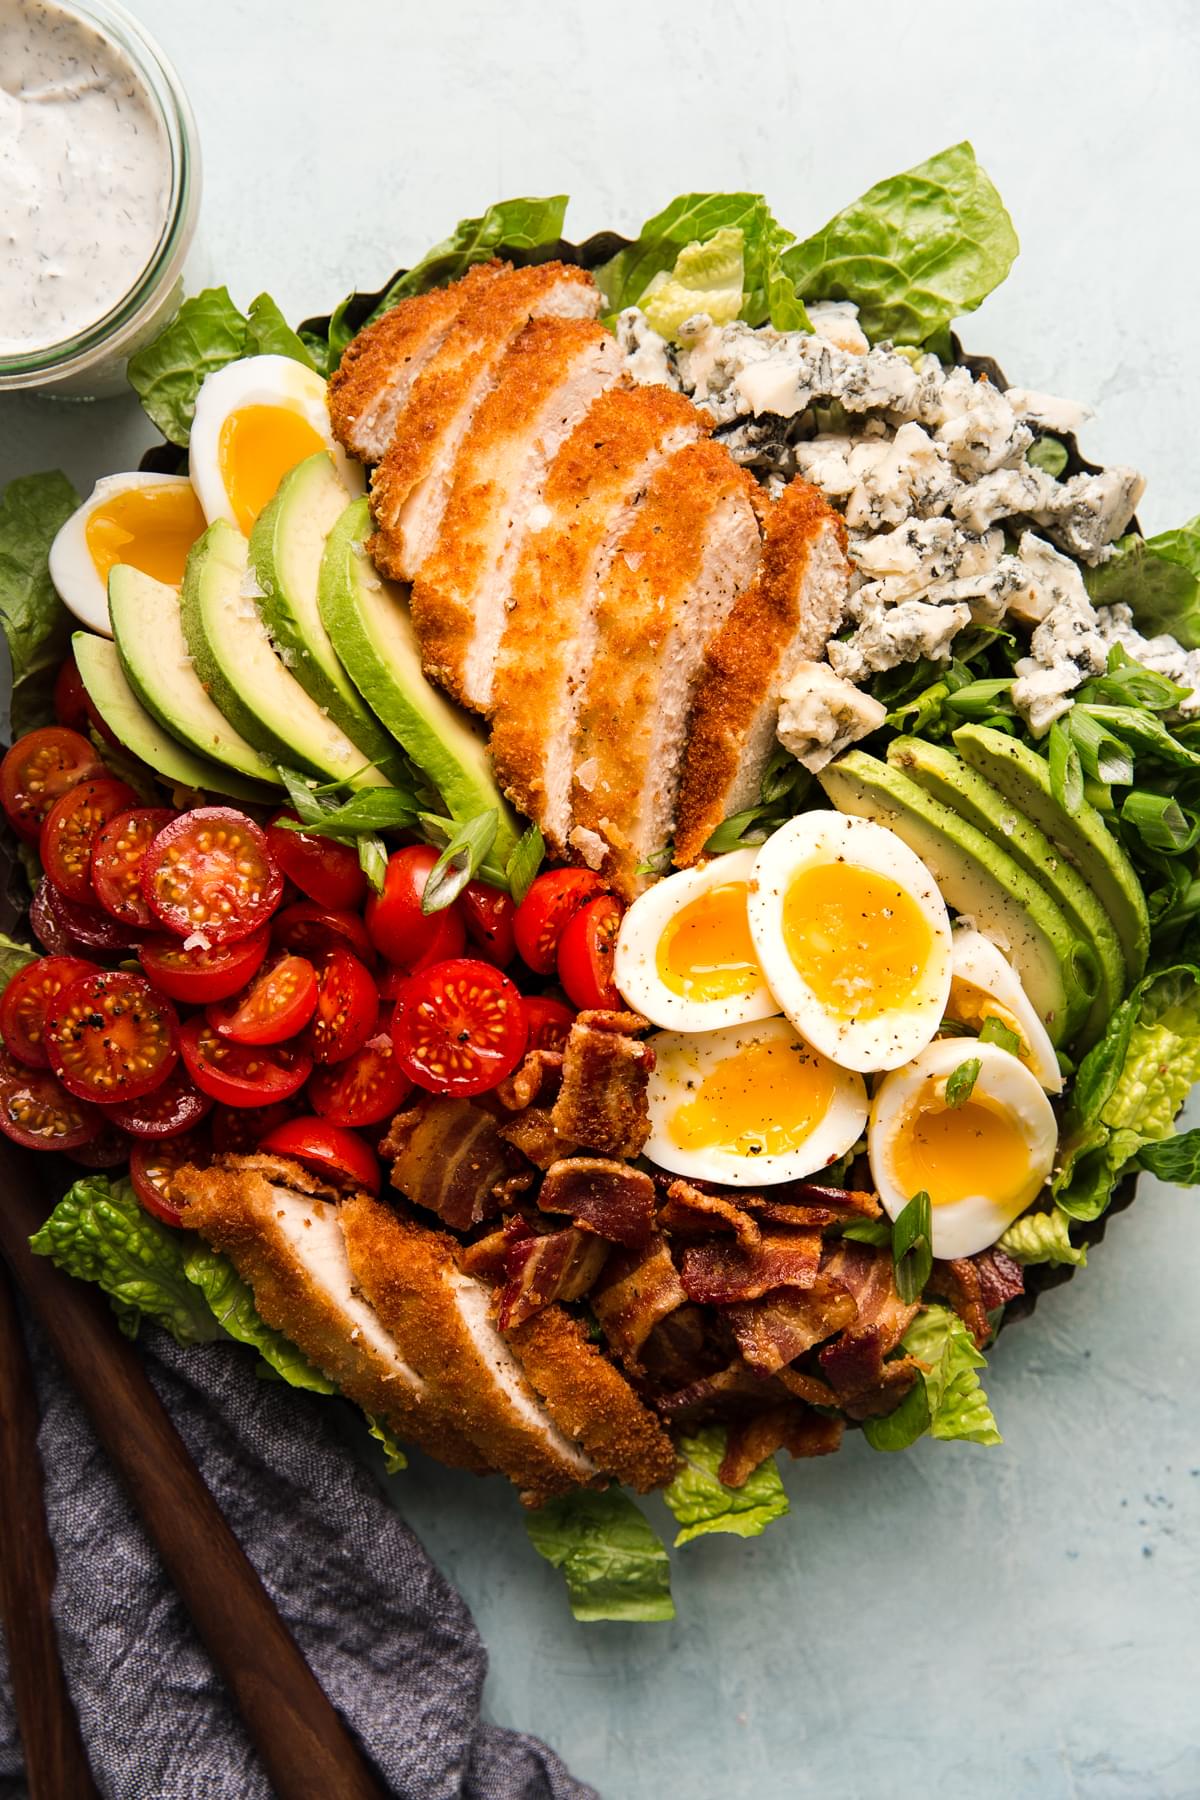 Cobb Salad with Crispy Panko Chicken, blue cheese and buttermilk ranch dressing